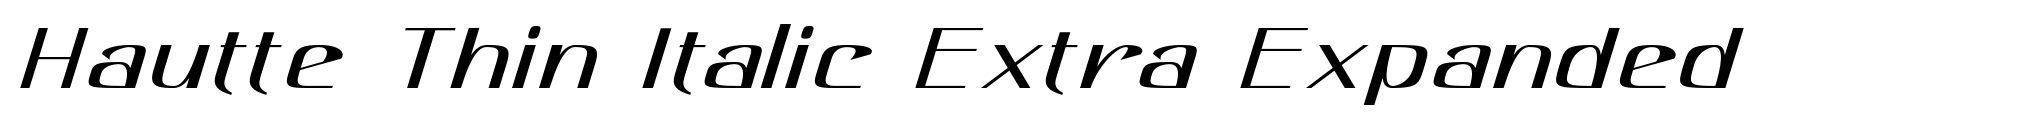 Hautte Thin Italic Extra Expanded image